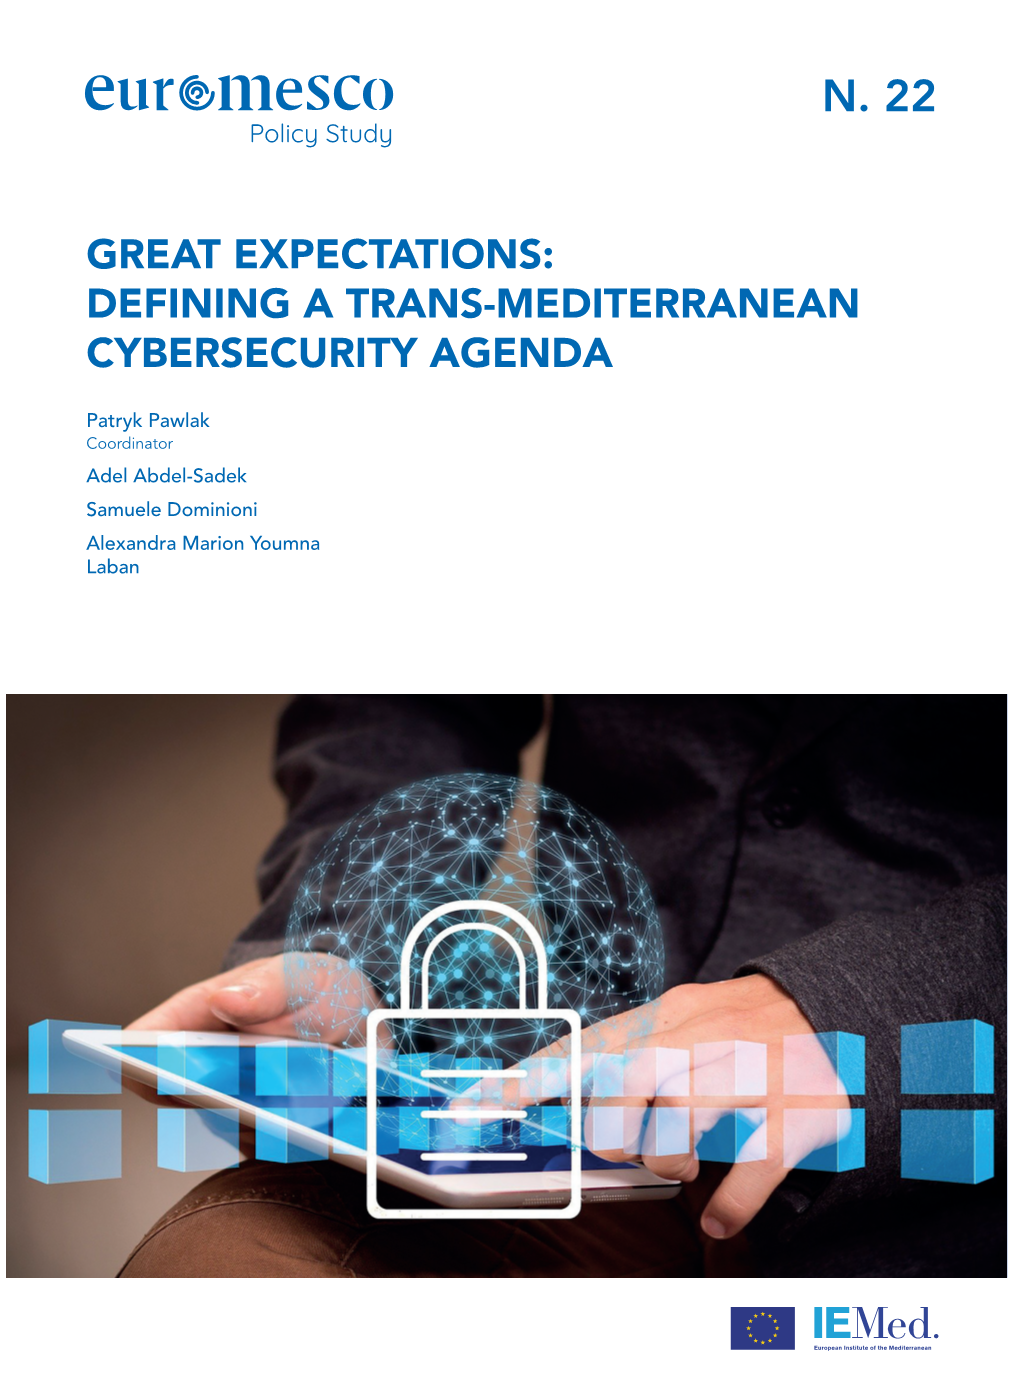 Great Expectations: Defining a Trans-Mediterranean Cybersecurity Agenda